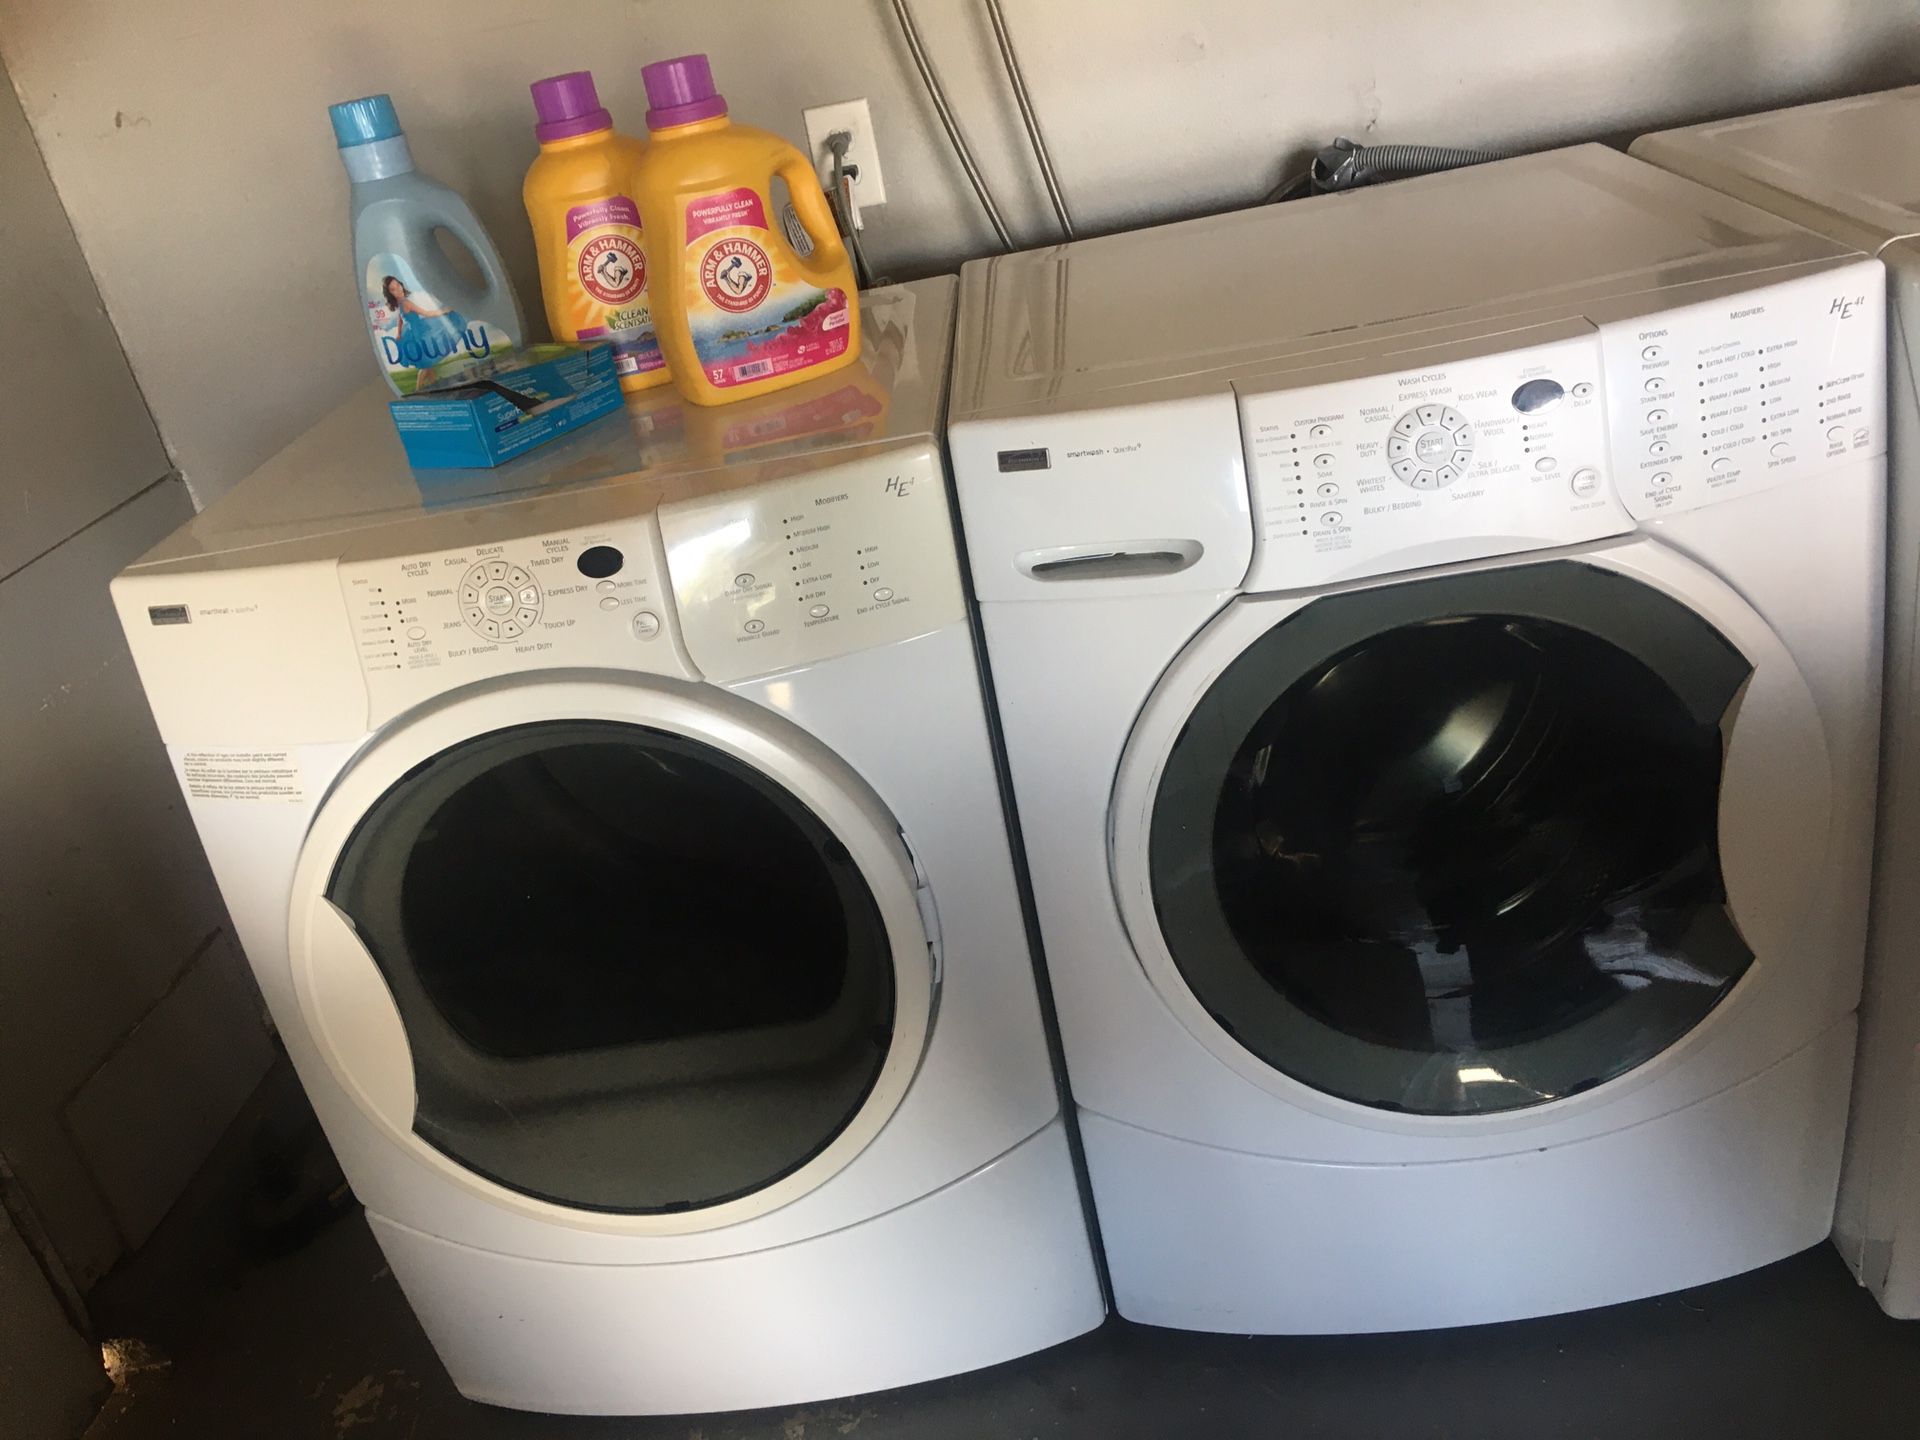 Kenmore Washer And Gas Dryer Set